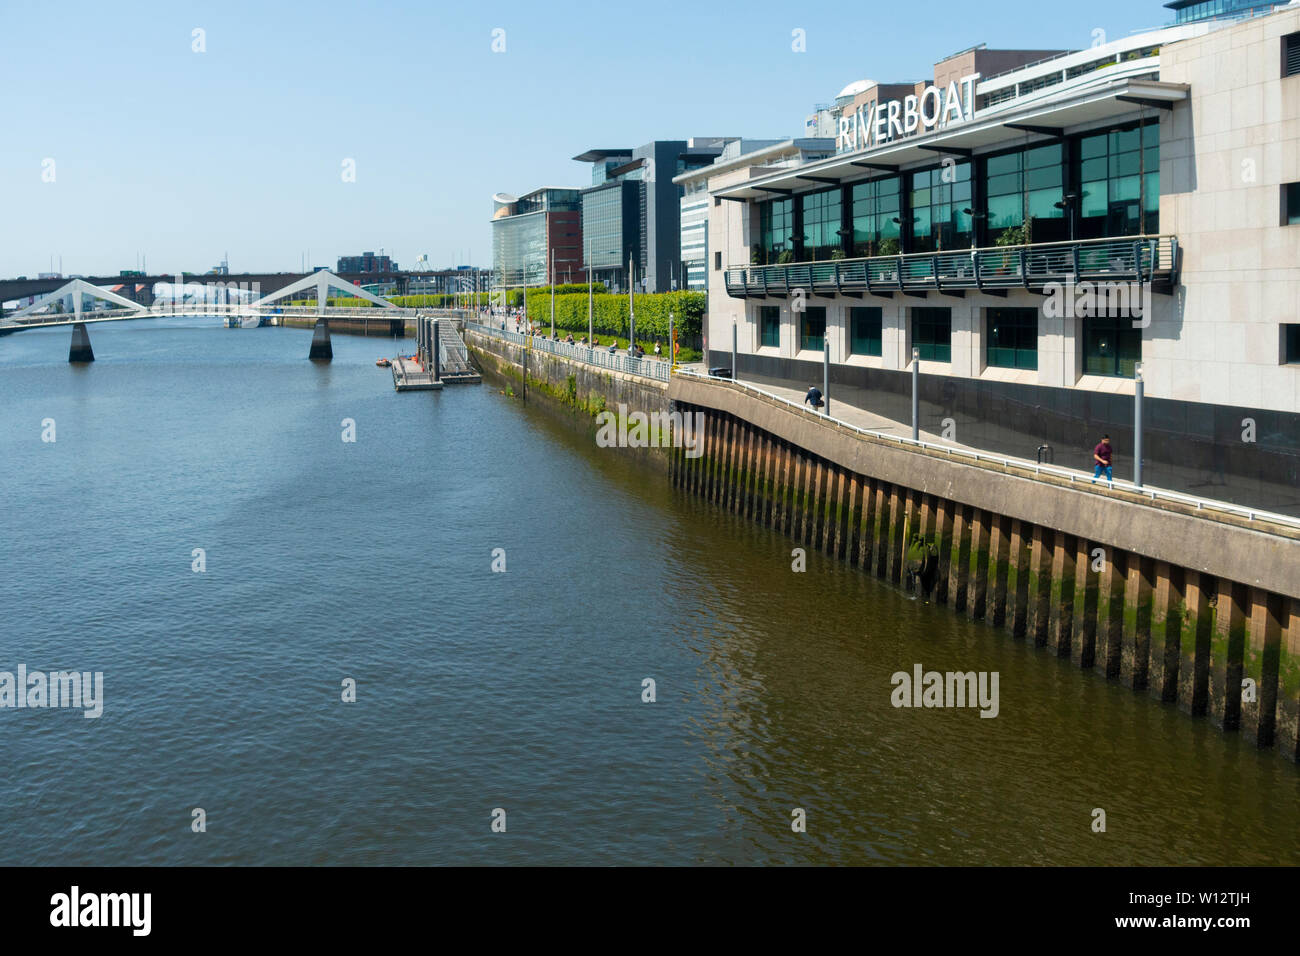 The River Clyde in central Glasgow, Scotland. Squiggly Bridge, Broomielaw, Grosvenor Riverboat casino, Clyde walkway, Stock Photo